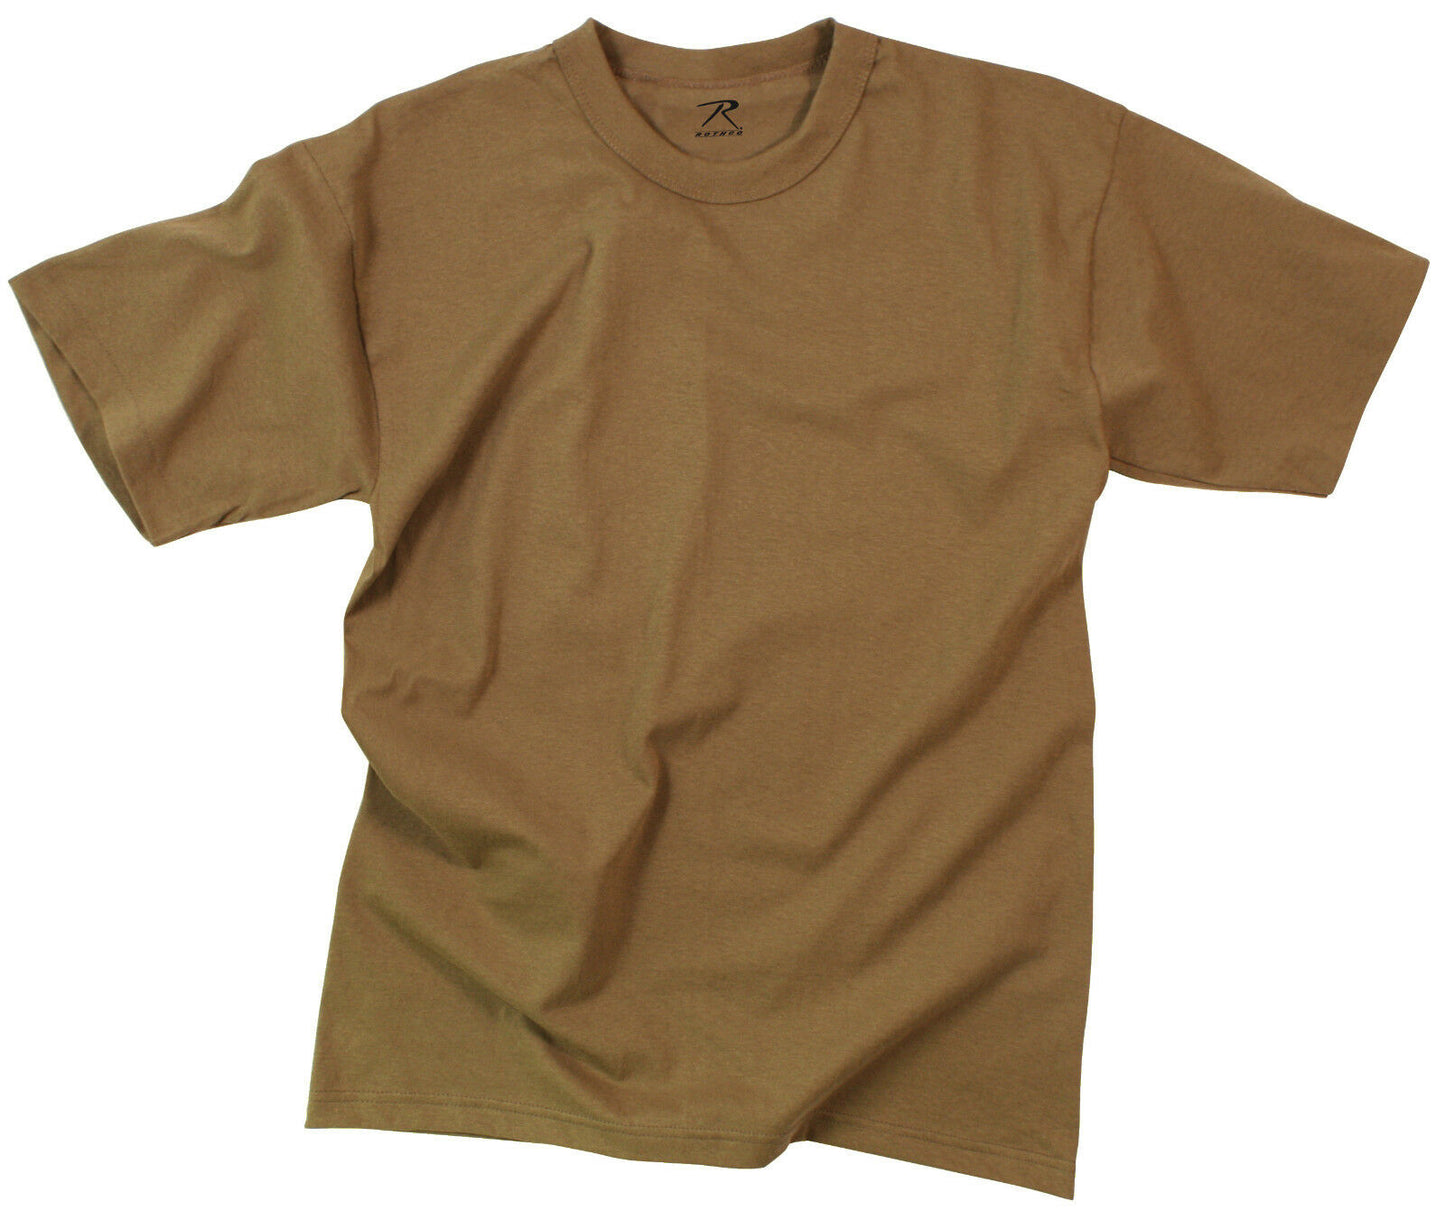 Rothco Moisture Wicking T-Shirts - 5 Pack Brown